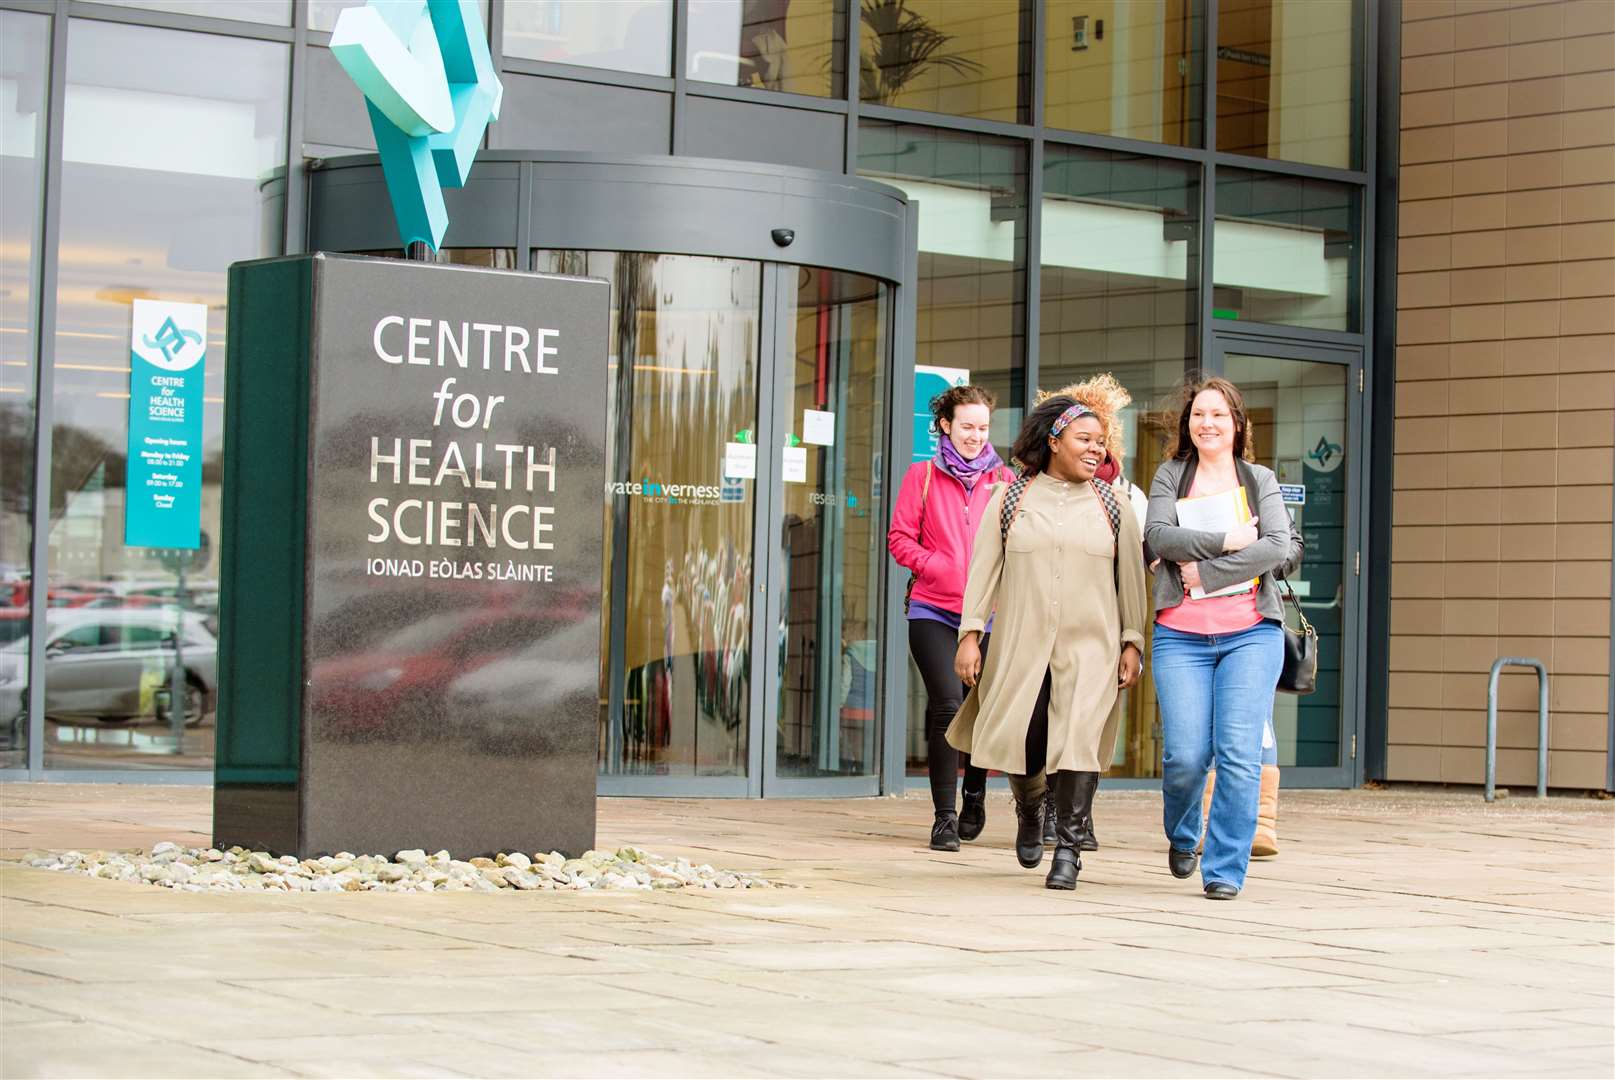 UHI's Centre for Health Science, in Inverness, opened today as a Covid-19 vaccination hub for north NHS workers.